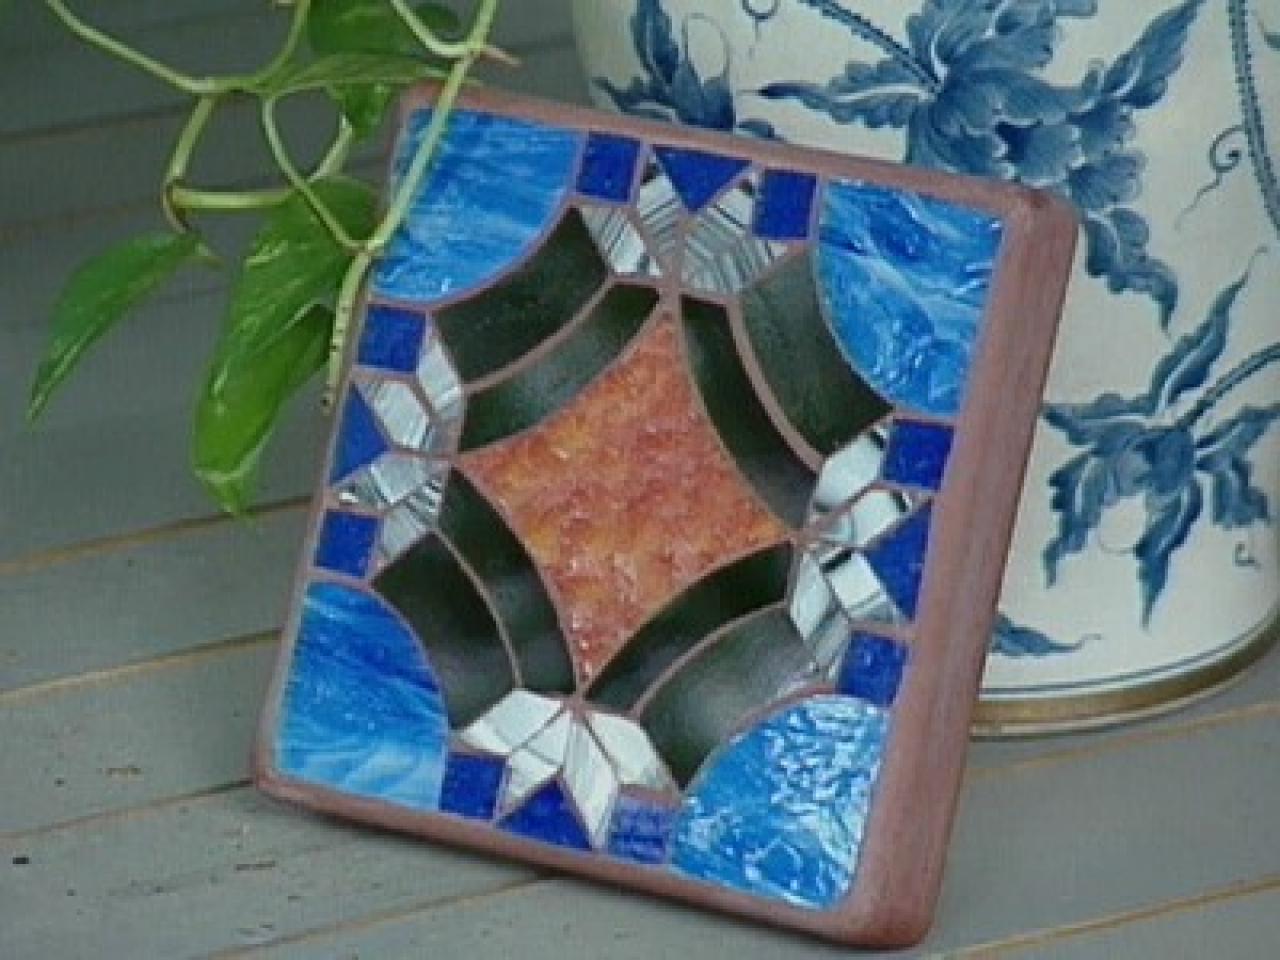 Glass Mosaic Tile Art – How to Make a Permanent Signature on Glass